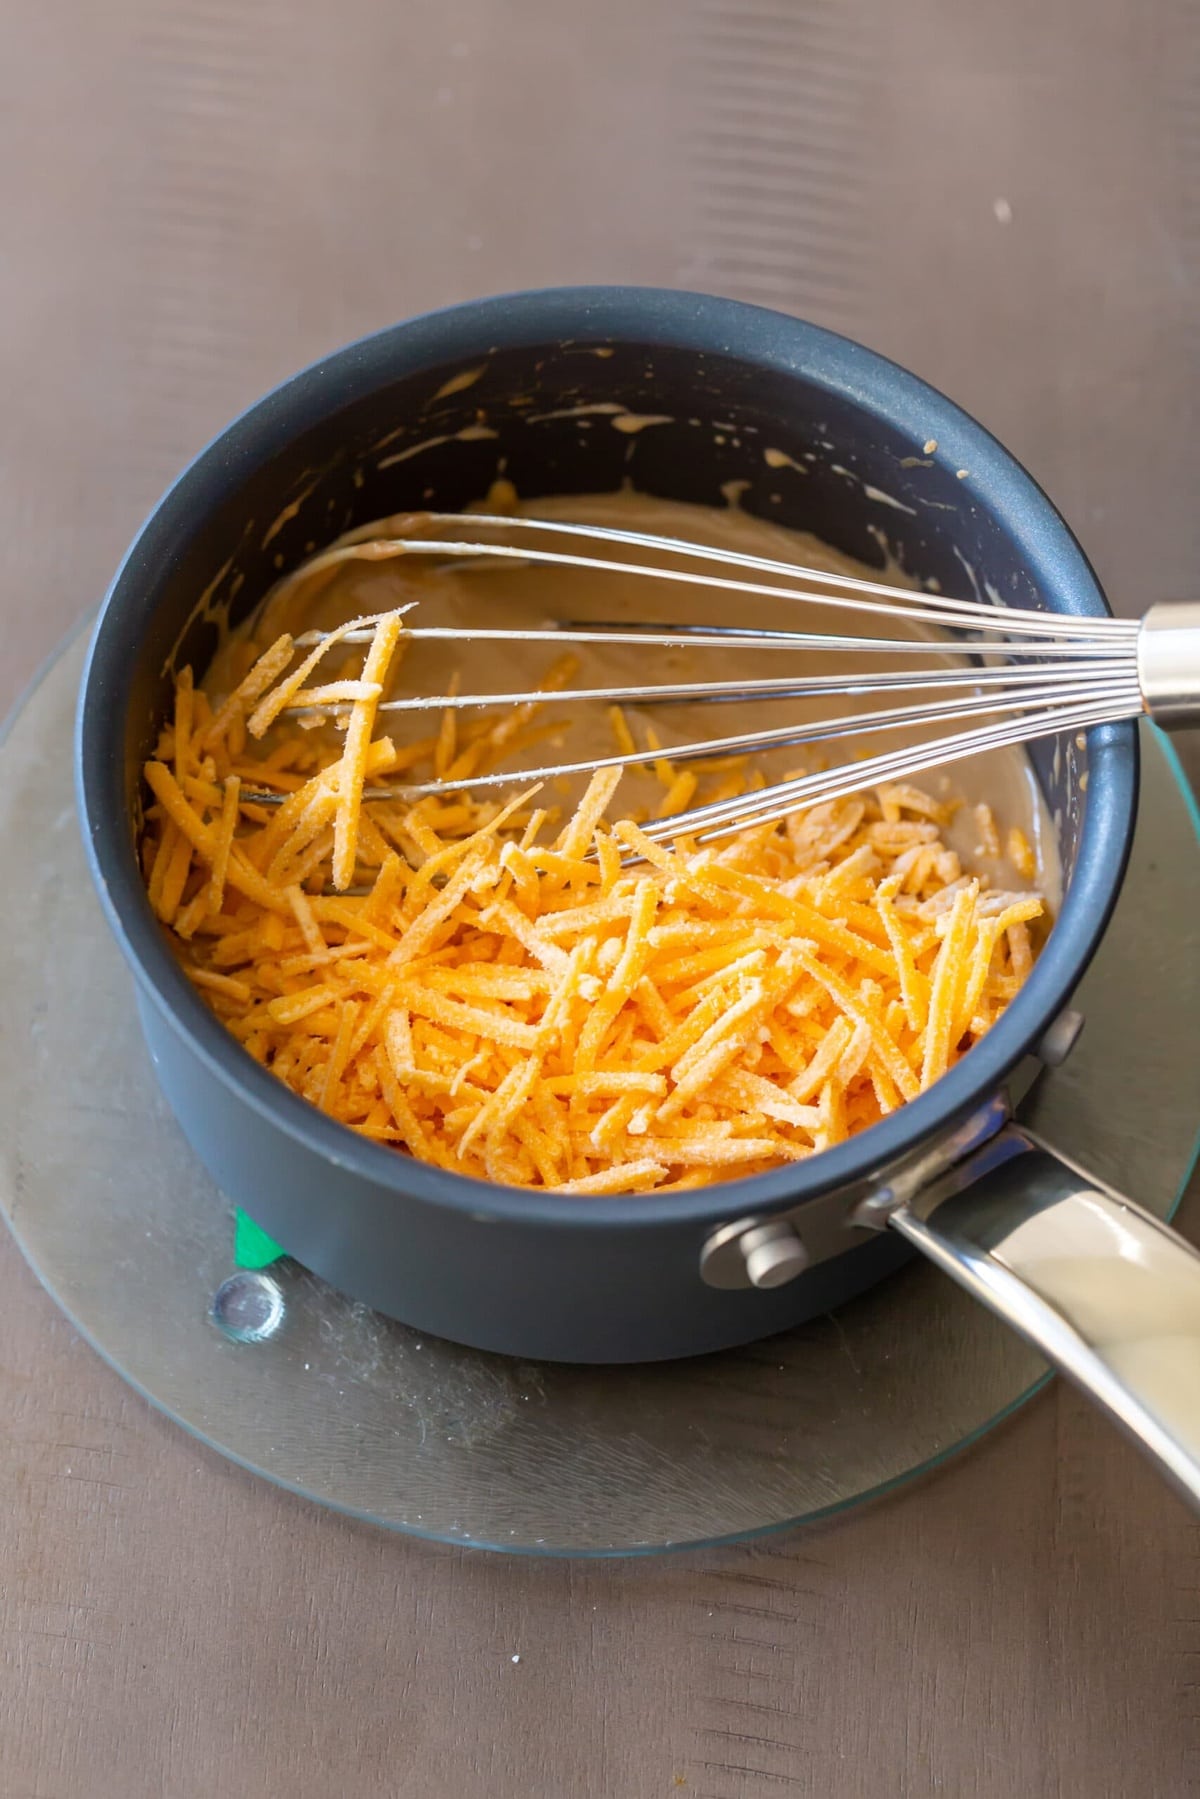 Adding grated cheddar cheese and constantly stirring it into the mixture.




